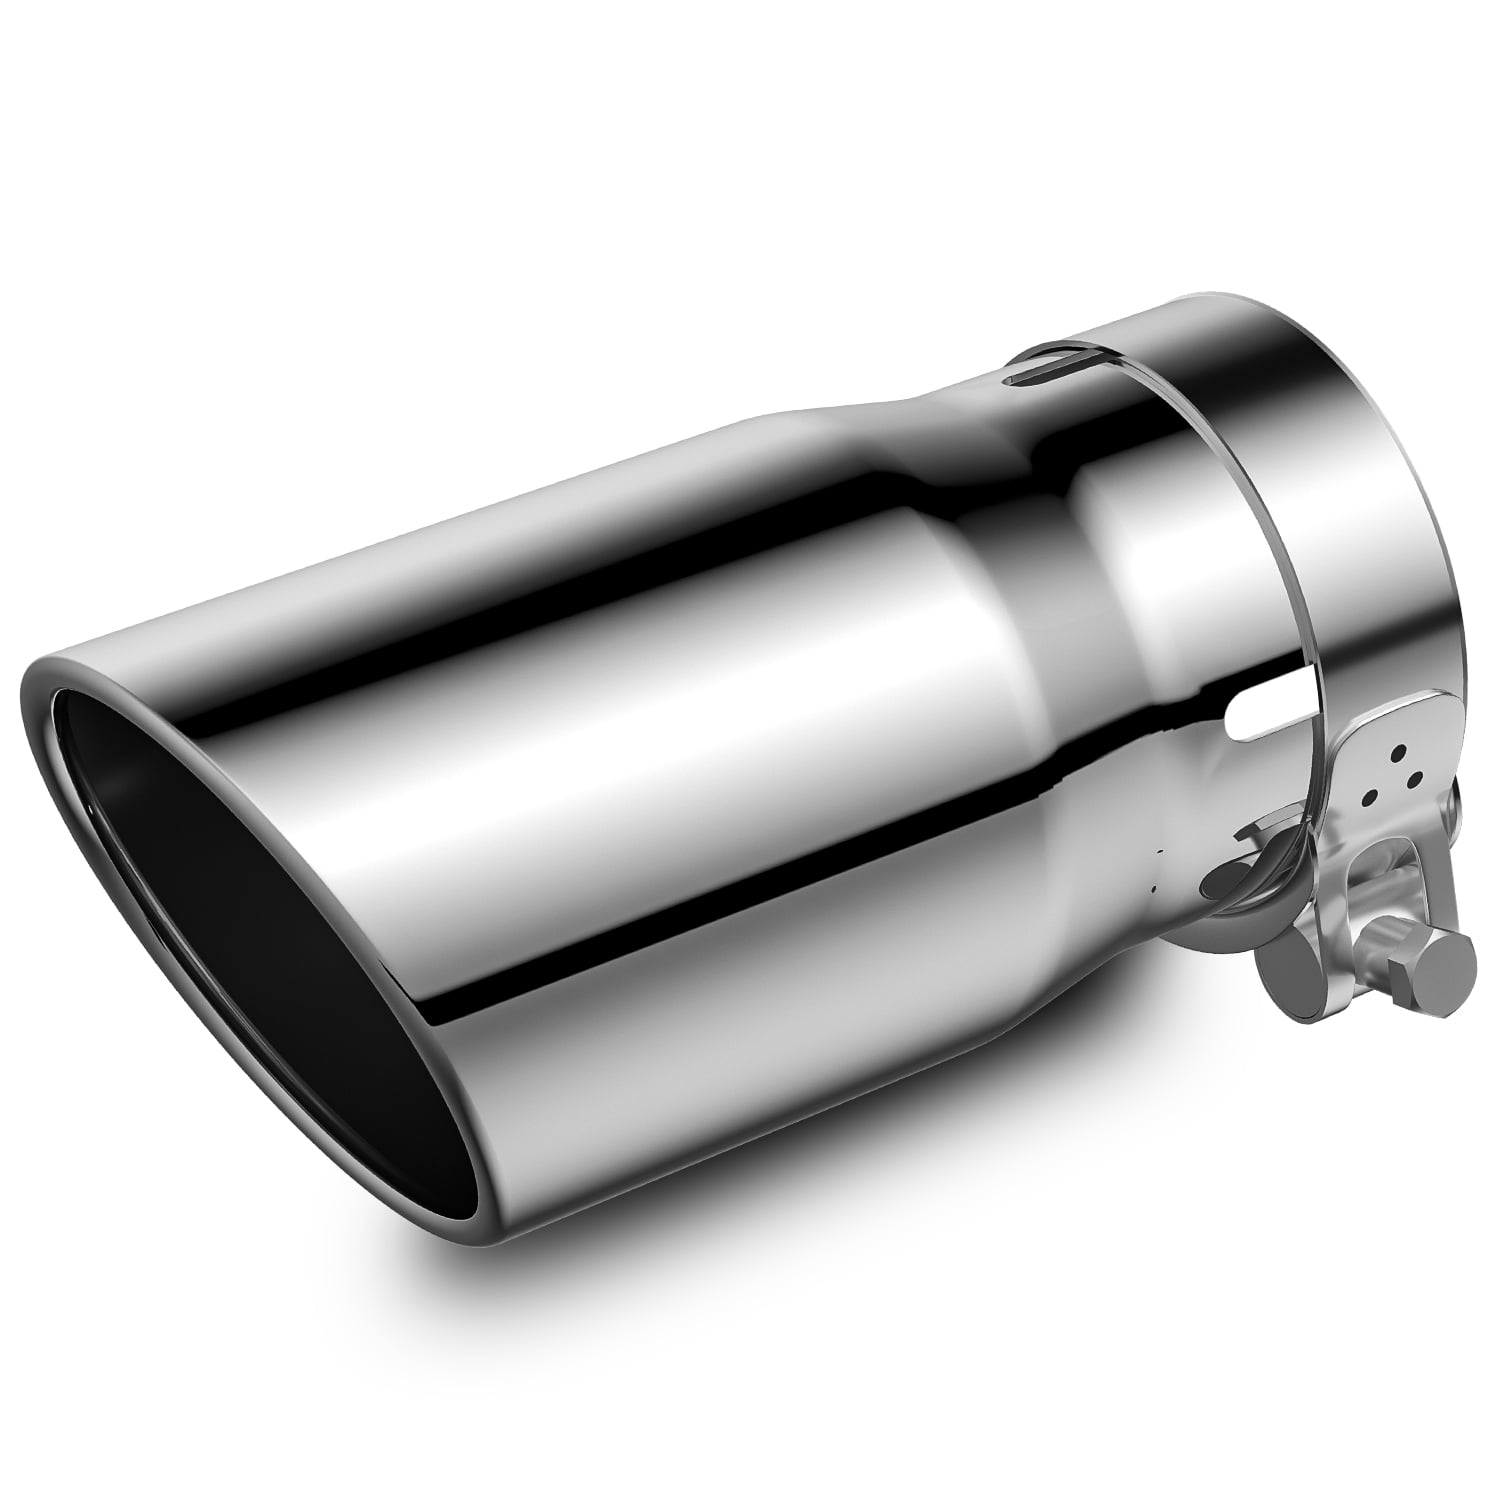 IFOKA 2.5 Inch Inlet Exhaust Tip 2.5 Inlet 4 Outlet 9 Long Black Exhaust Tips Stainless Steel Exhaust Tips Tailpipe All 2.5 Inch Outside Diameter Black Powder Coated 